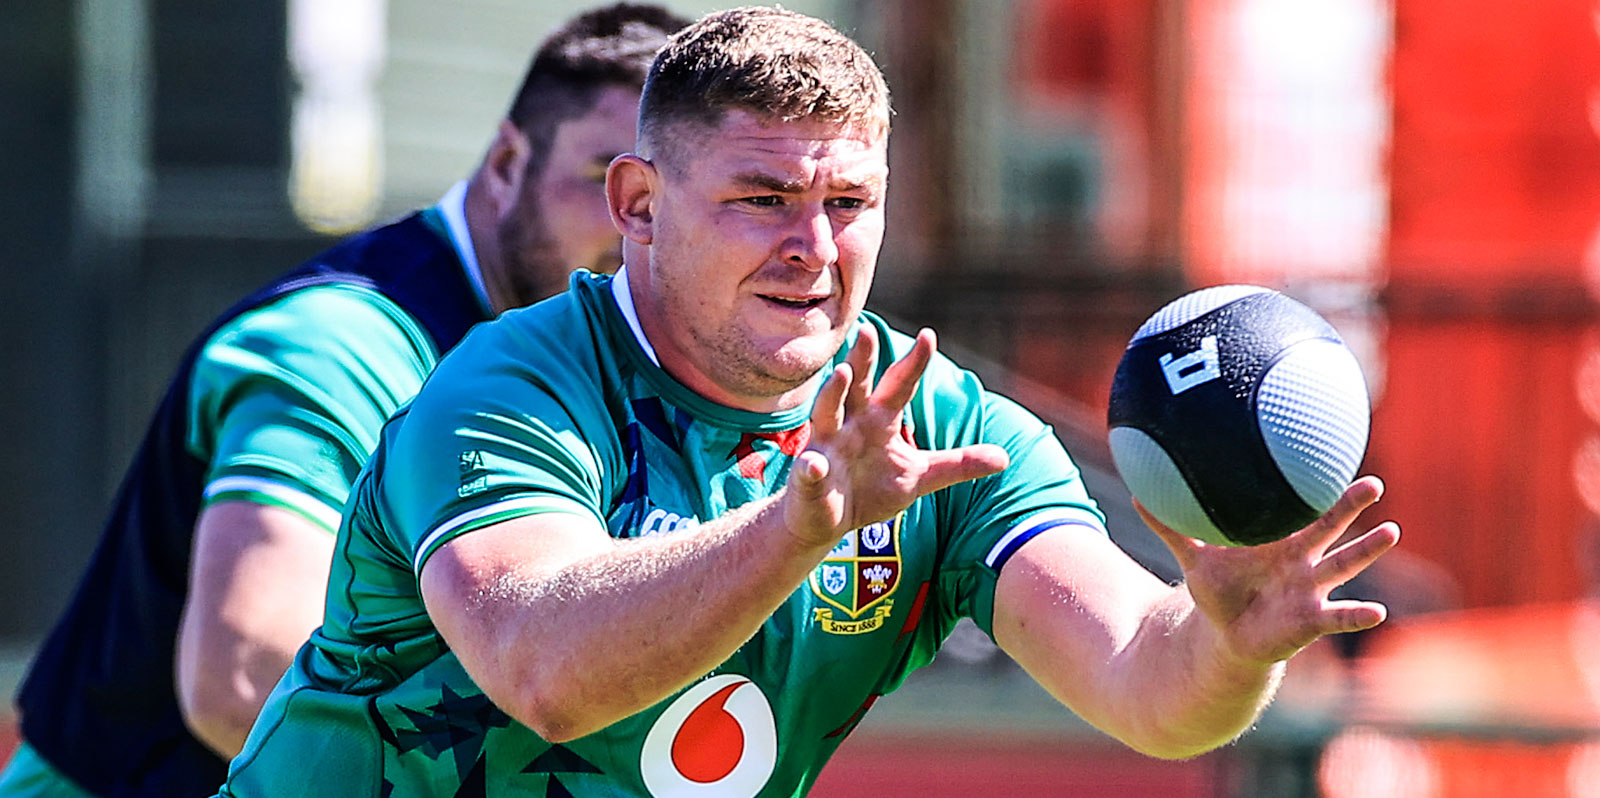 Tadhg Furlong at a Lions training session earlier in the week.